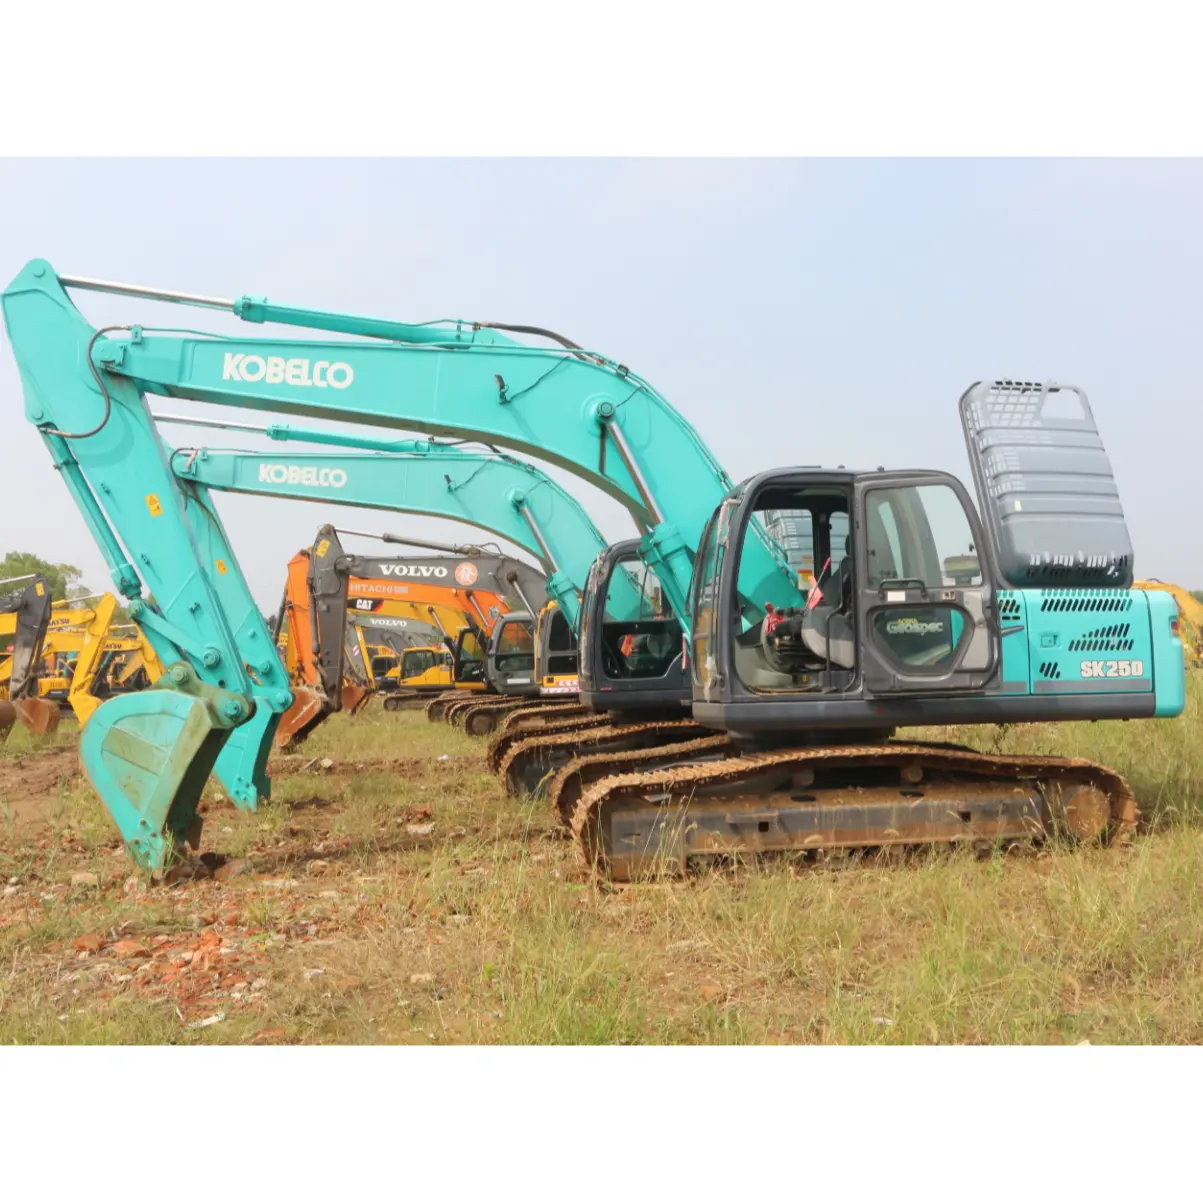 Japanese original Used construction machinery Kobelco SK250 used caterpillar excavator 25 tons 30 tons low price for sold